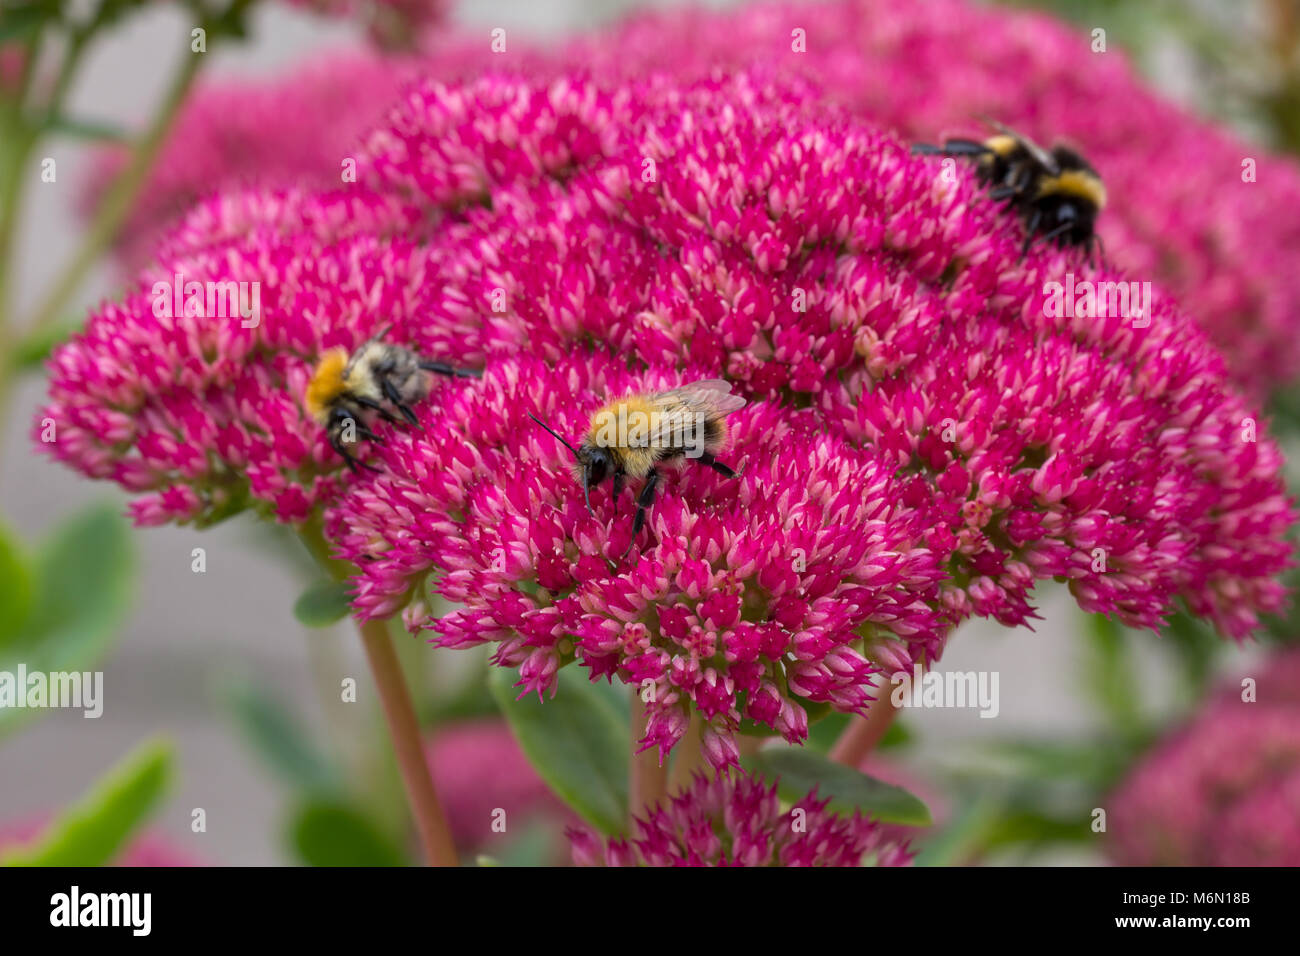 Common Carder bees, bombus pascuorum, pollinating sedum flowers at the Lappa Valley Steam Railway attraction in Cornwall, England, UK Stock Photo